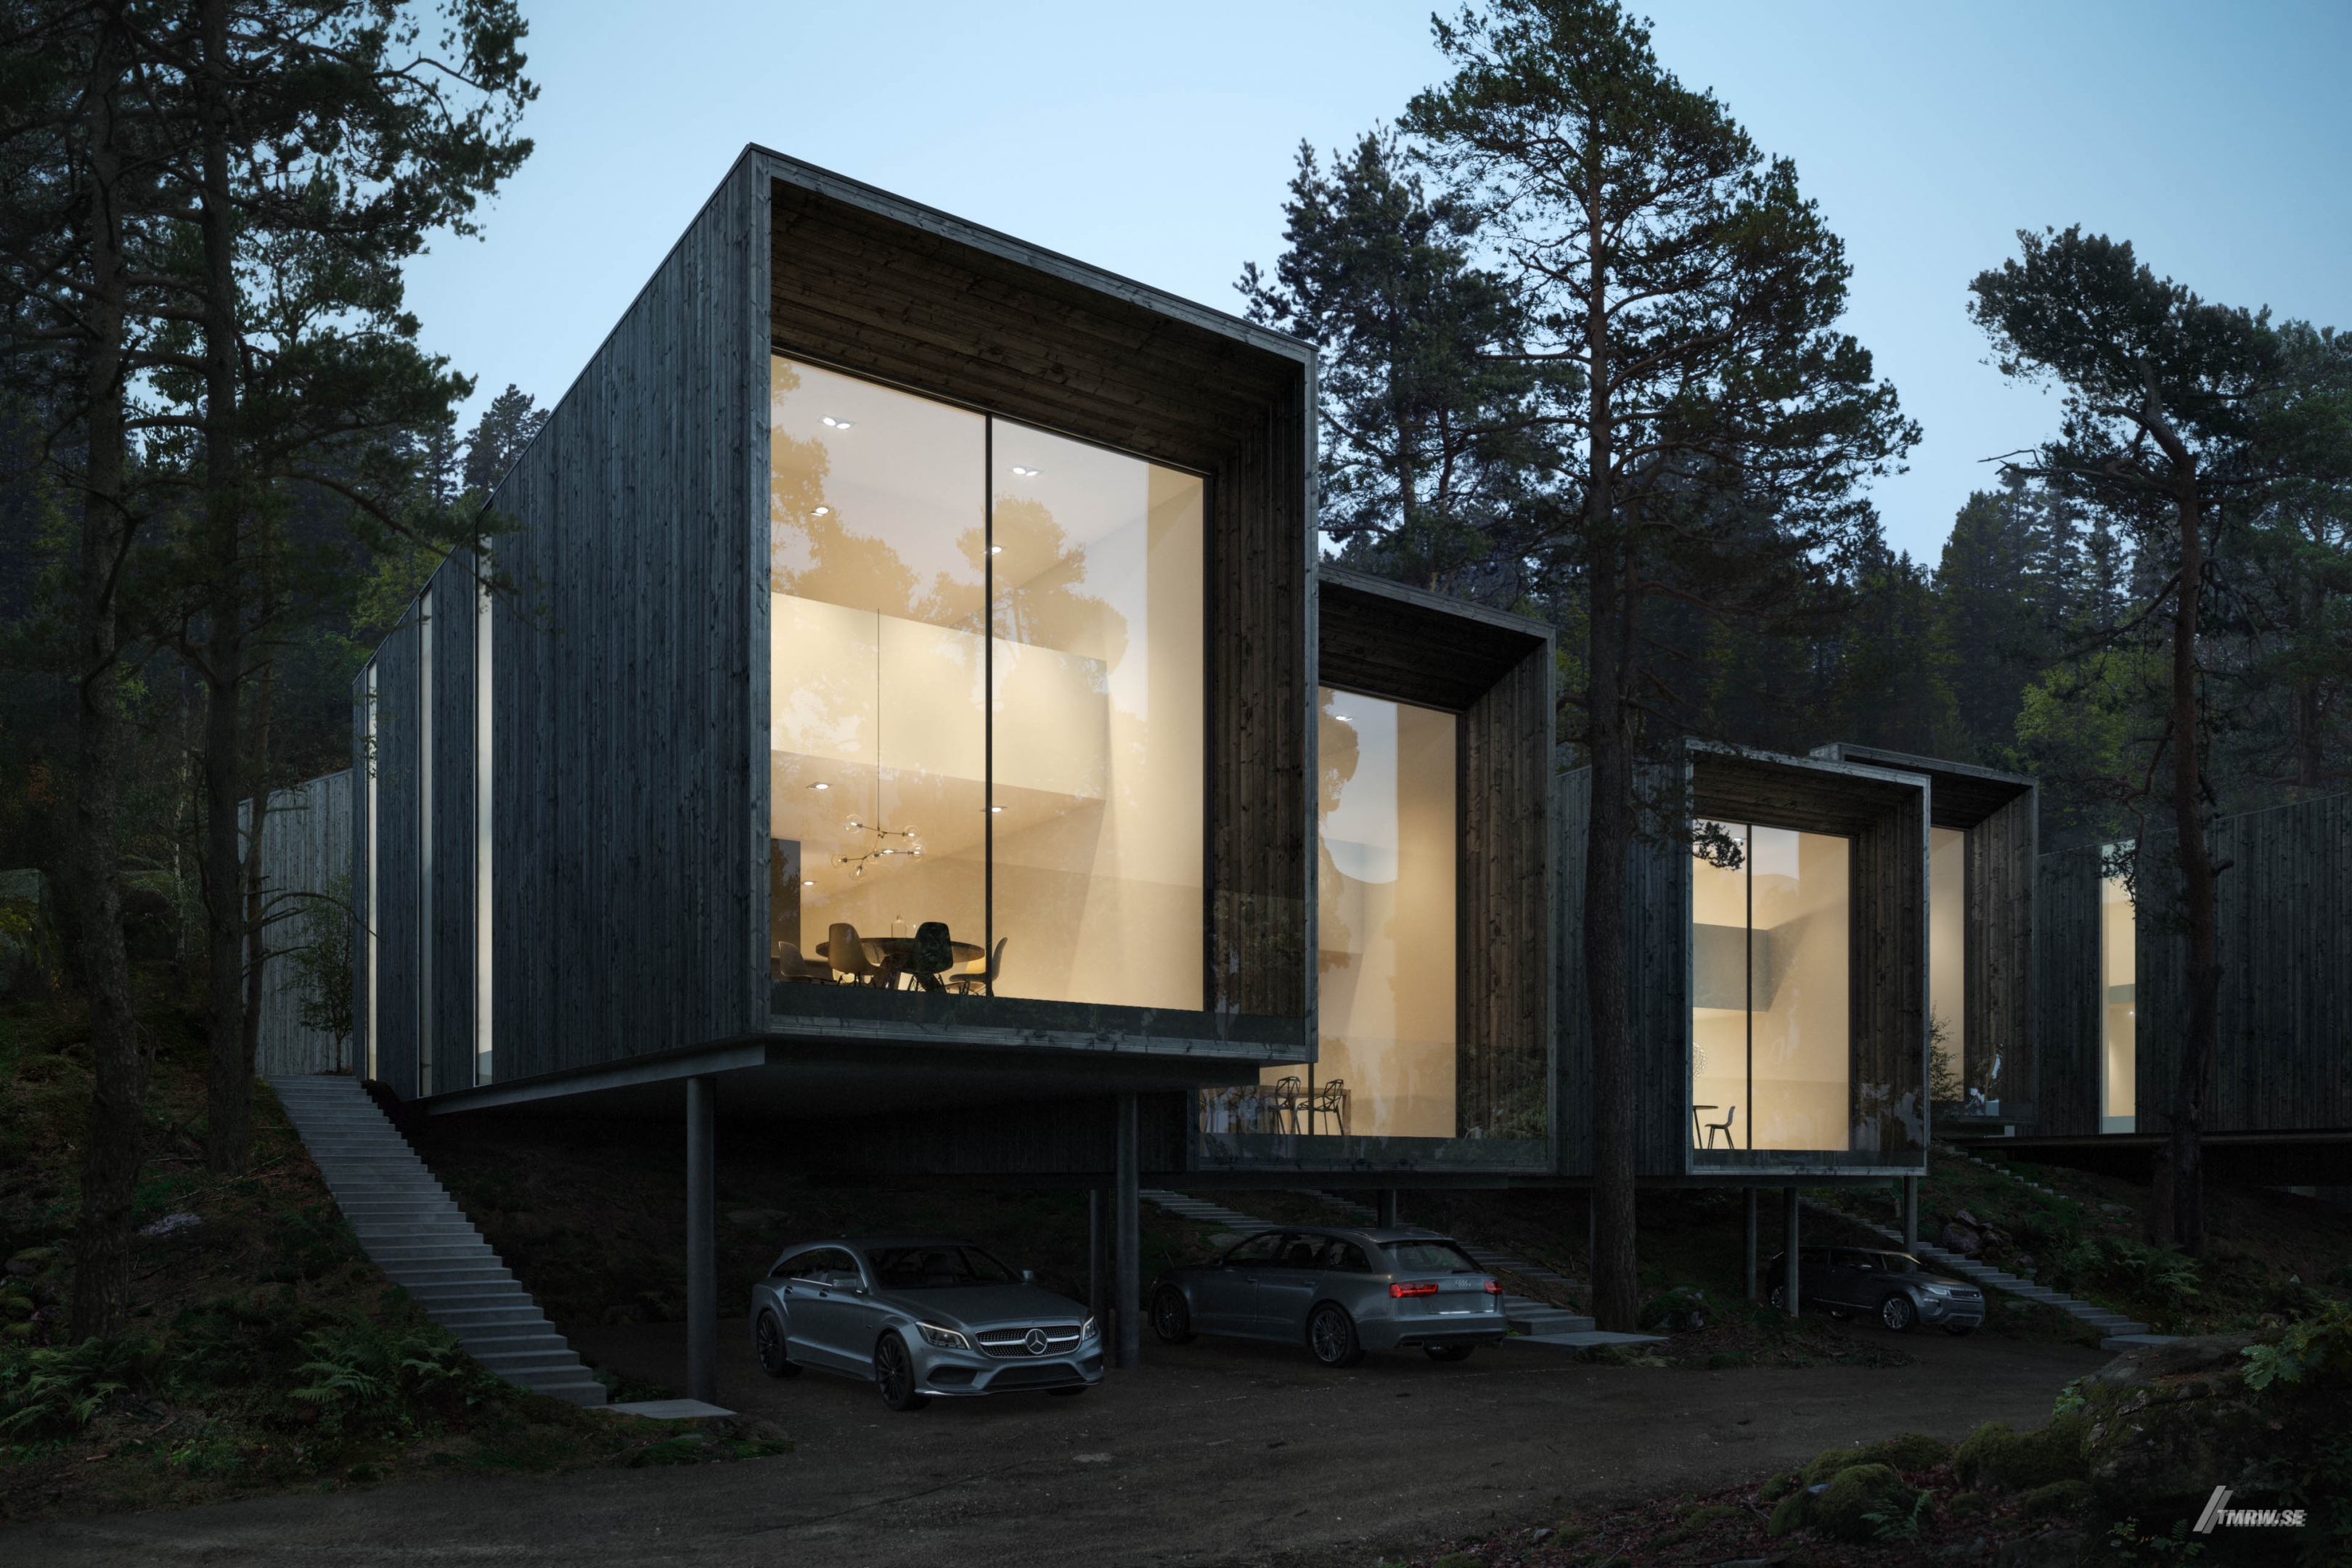 Architectural visualization of Lännersta for Imola a modern cube shaped house in evening light form an eye view.